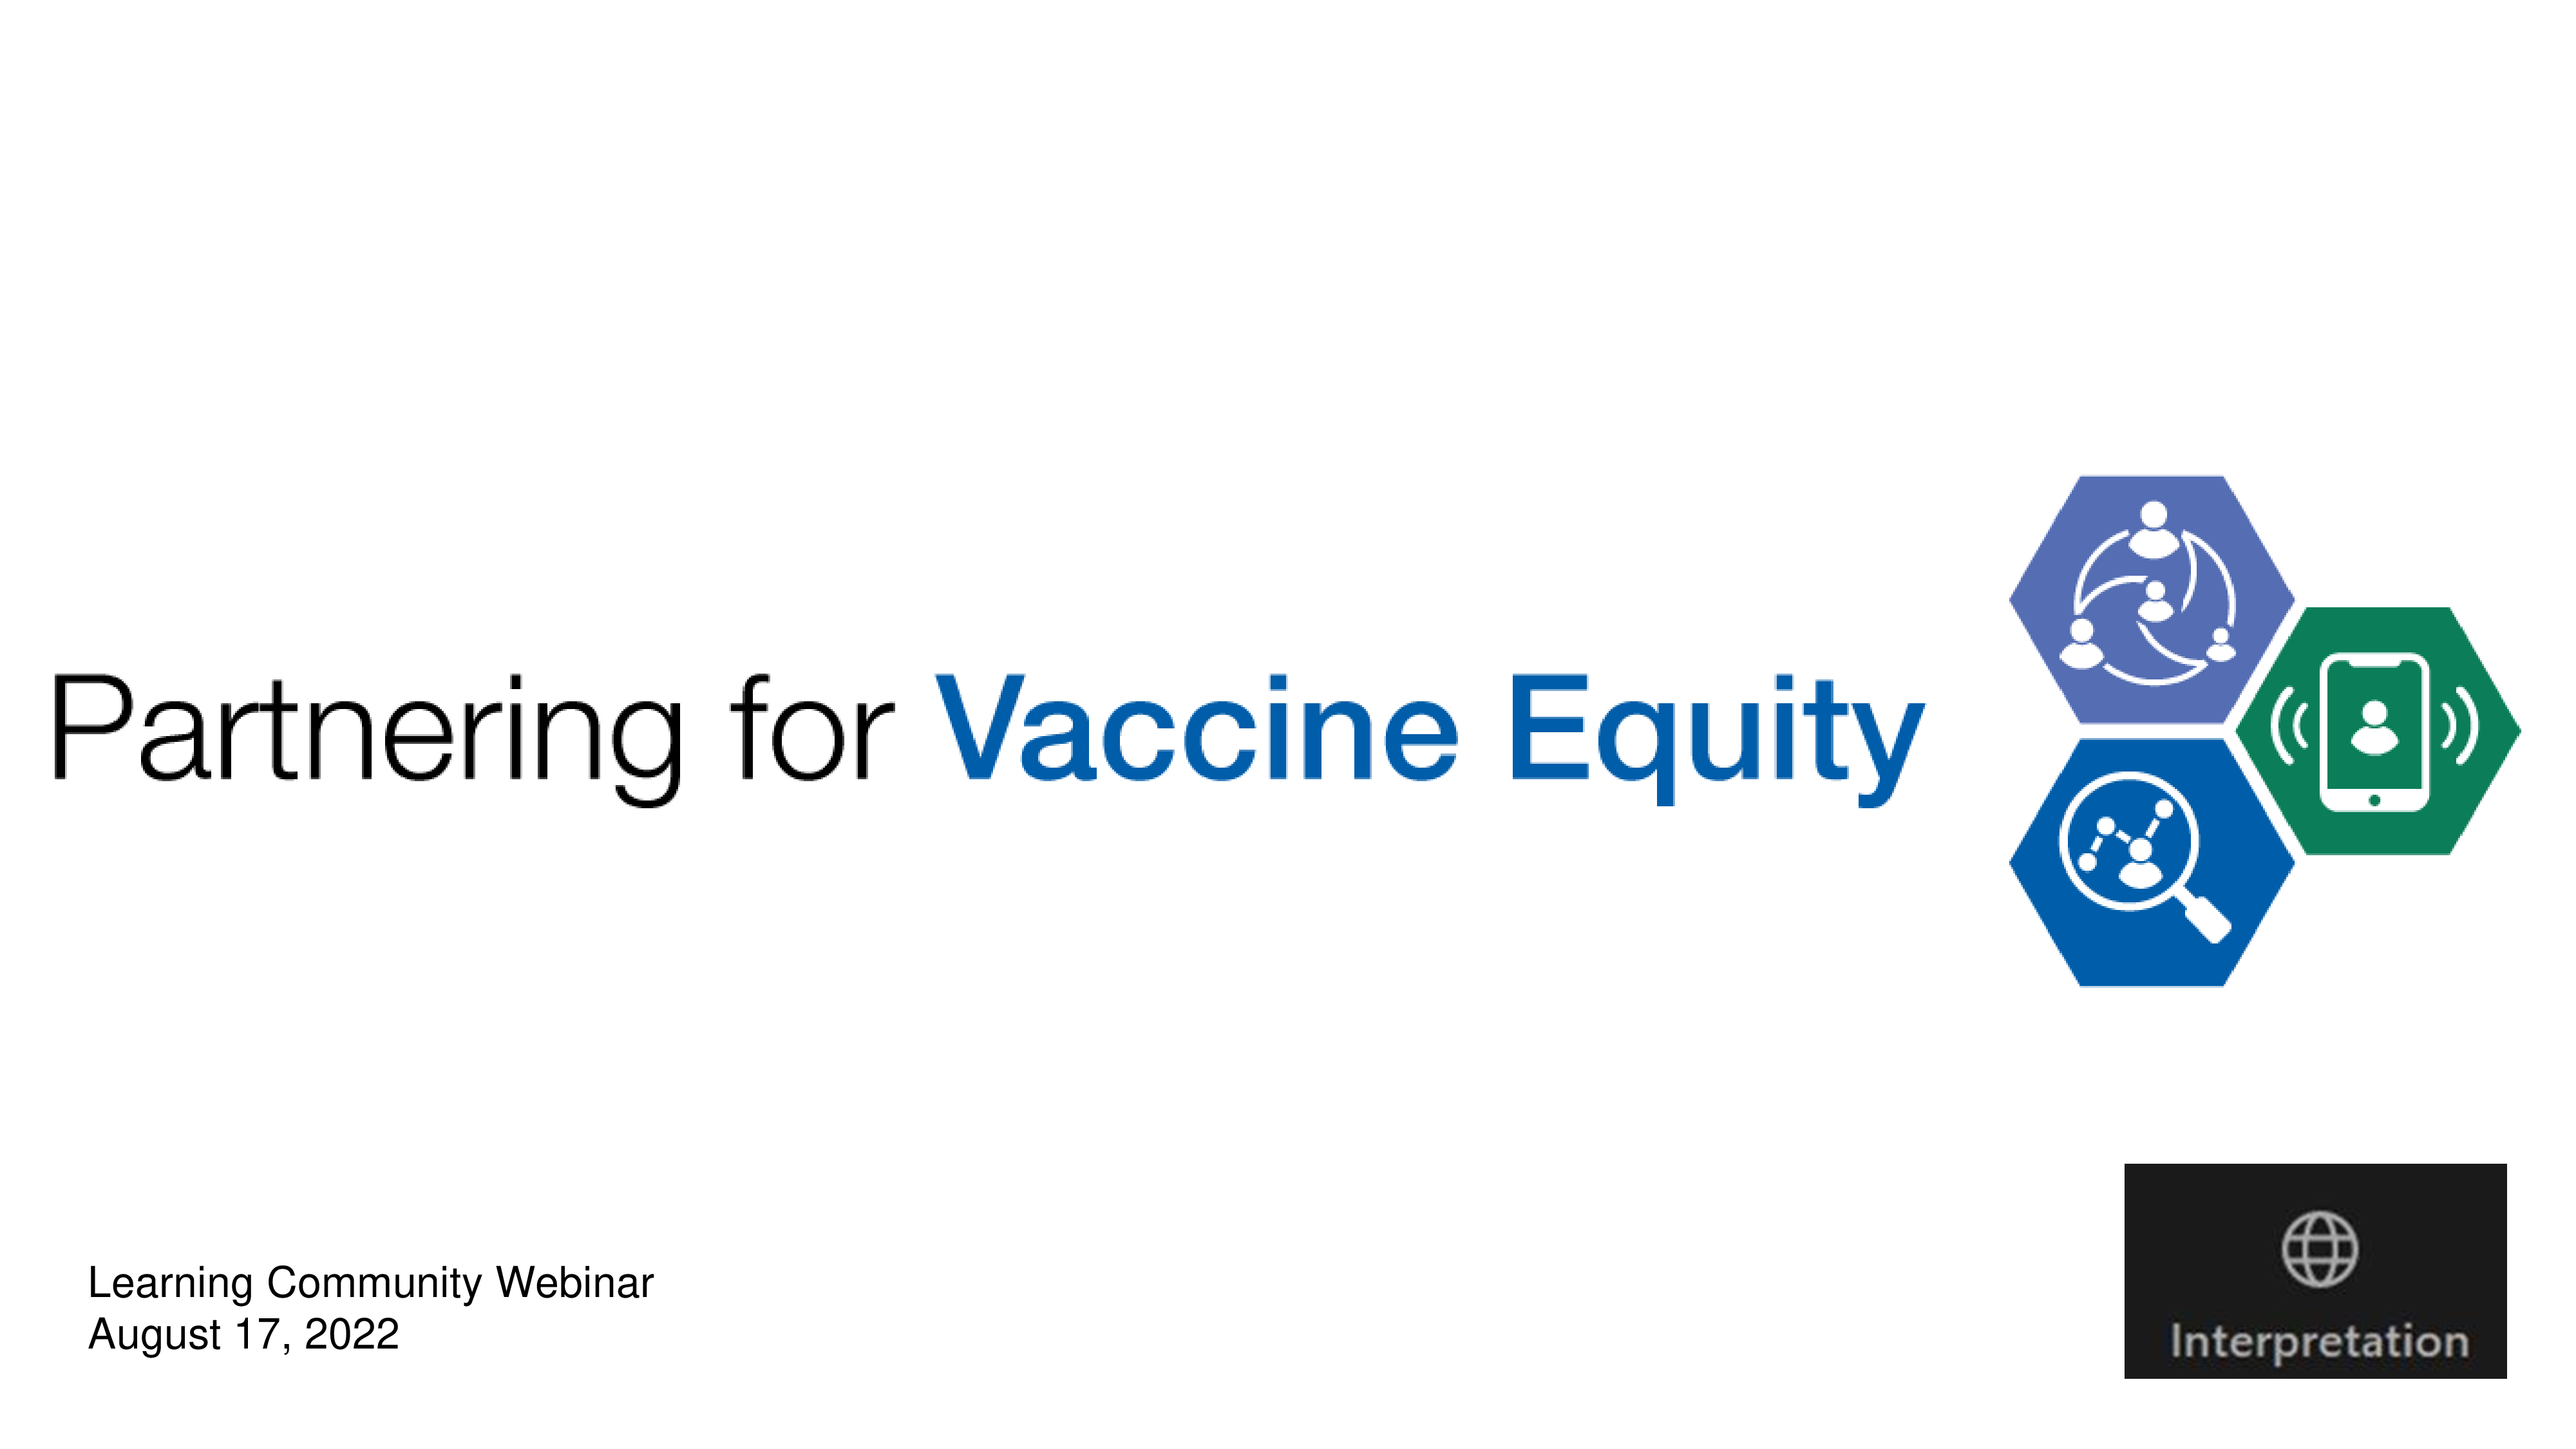 First PowerPoint slide with white background and Partnering for Vaccine Equity name and logo.